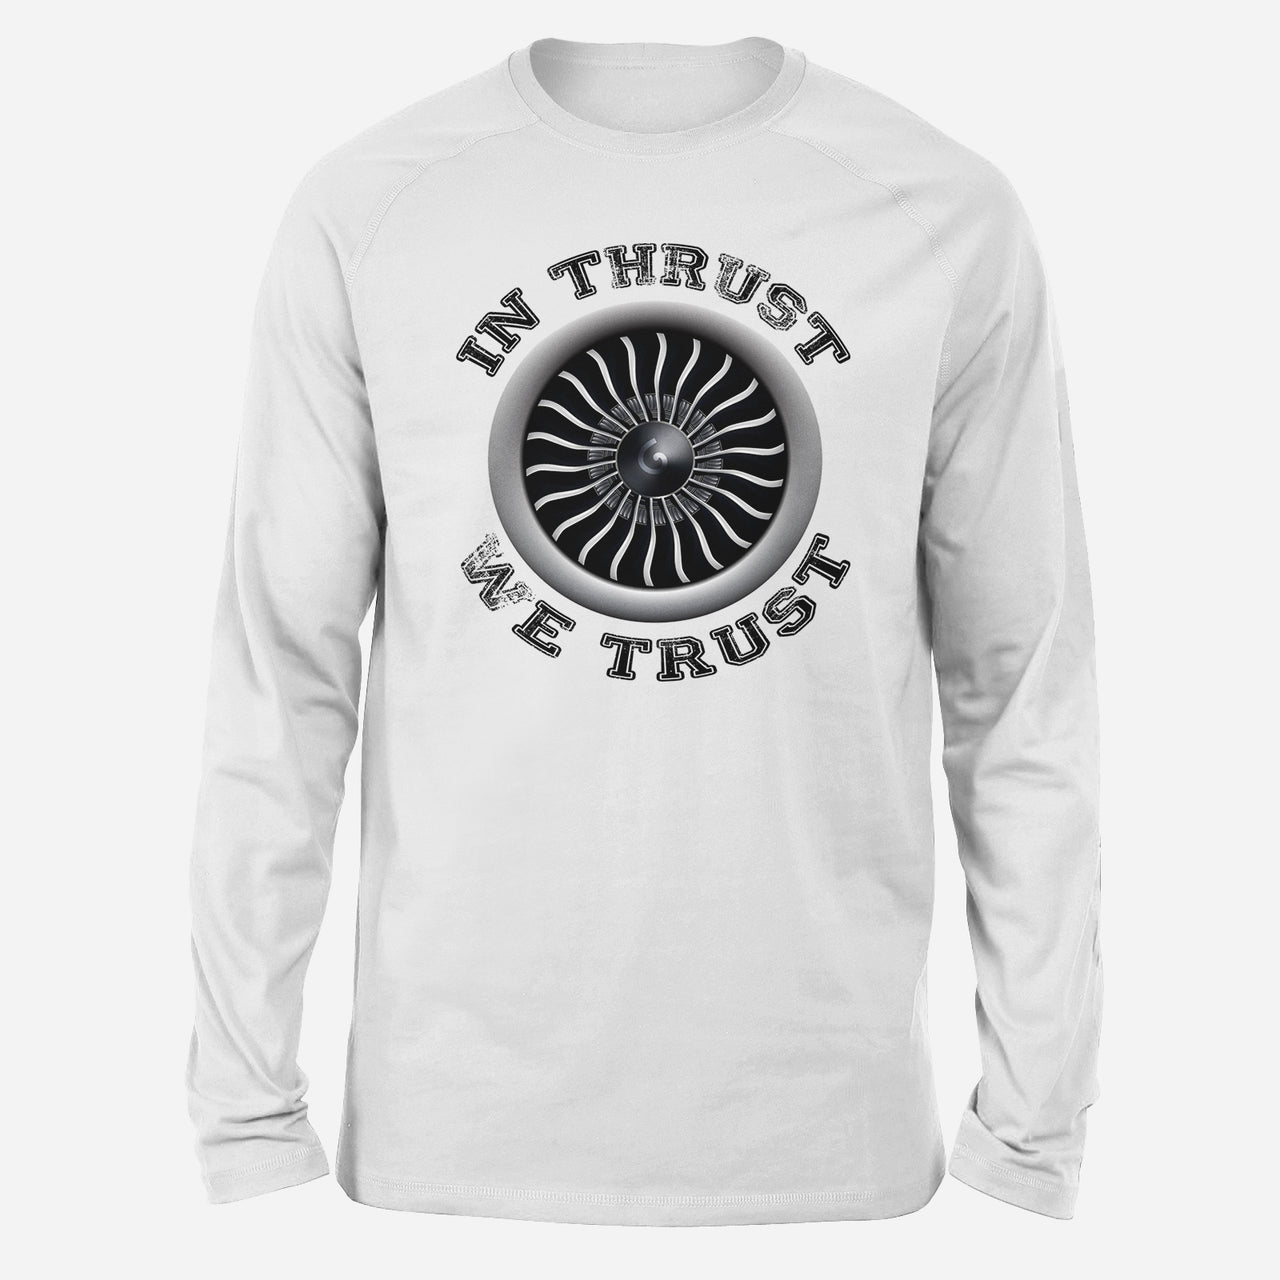 In Thrust We Trust (Vol 2) Designed Long-Sleeve T-Shirts